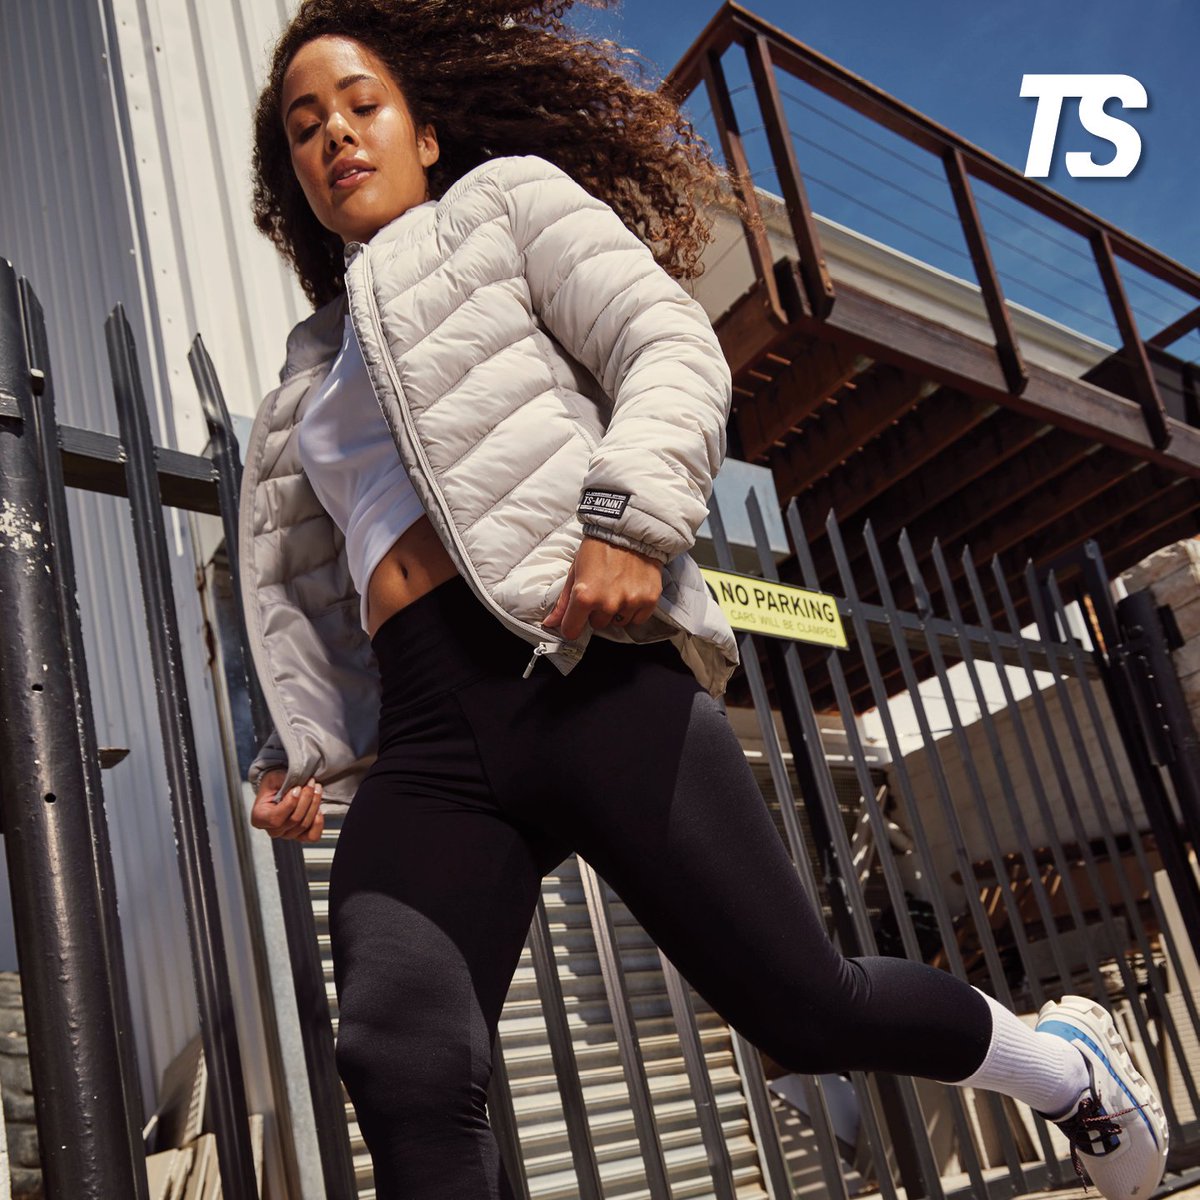 Ignite your style, break the mould. Join the movement that refuses to be conventional. Make a statement of your own.

TS Funnel Grey Puffer Jacket, R499.95 (also available in black) in- store & online: bit.ly/49N7LjD

#BringingTheHeat #JoinTheMovement #TSbyTotalsports